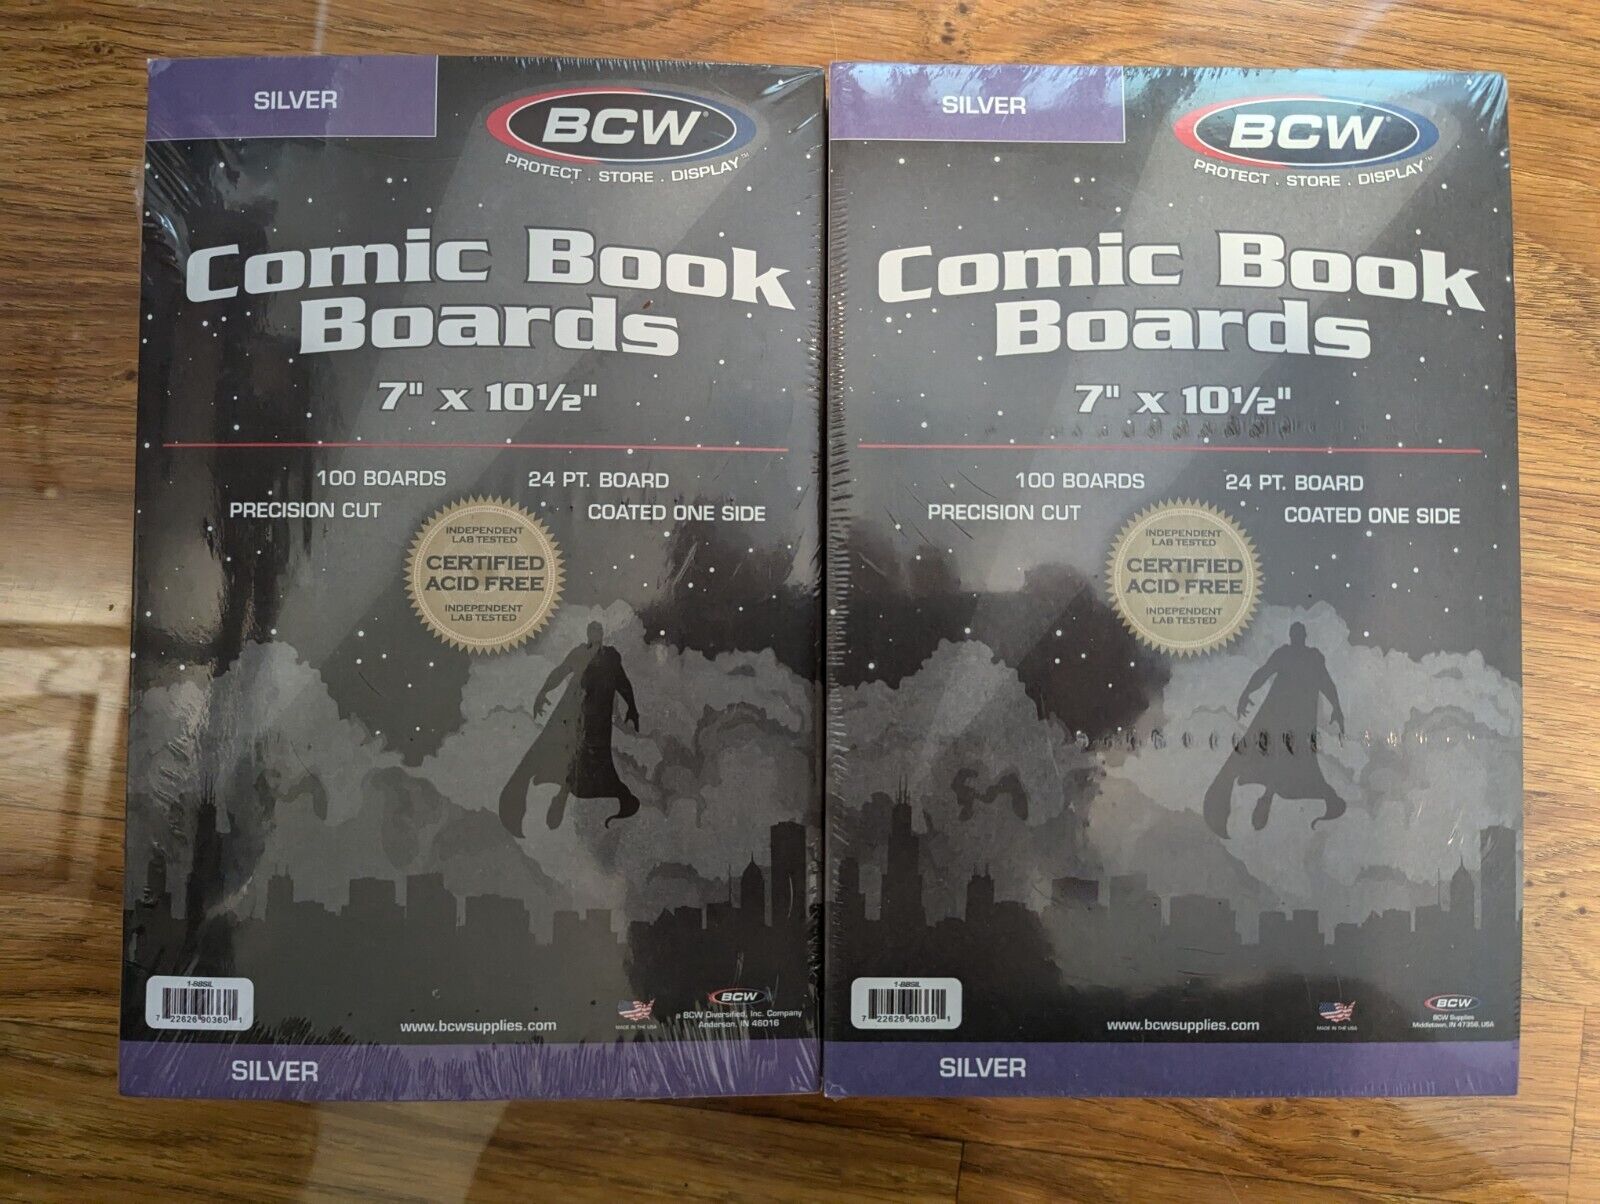 BCW Silver Comic Book Backer Boards 2Packs of 100 (200 Total Acid Free) Sealed